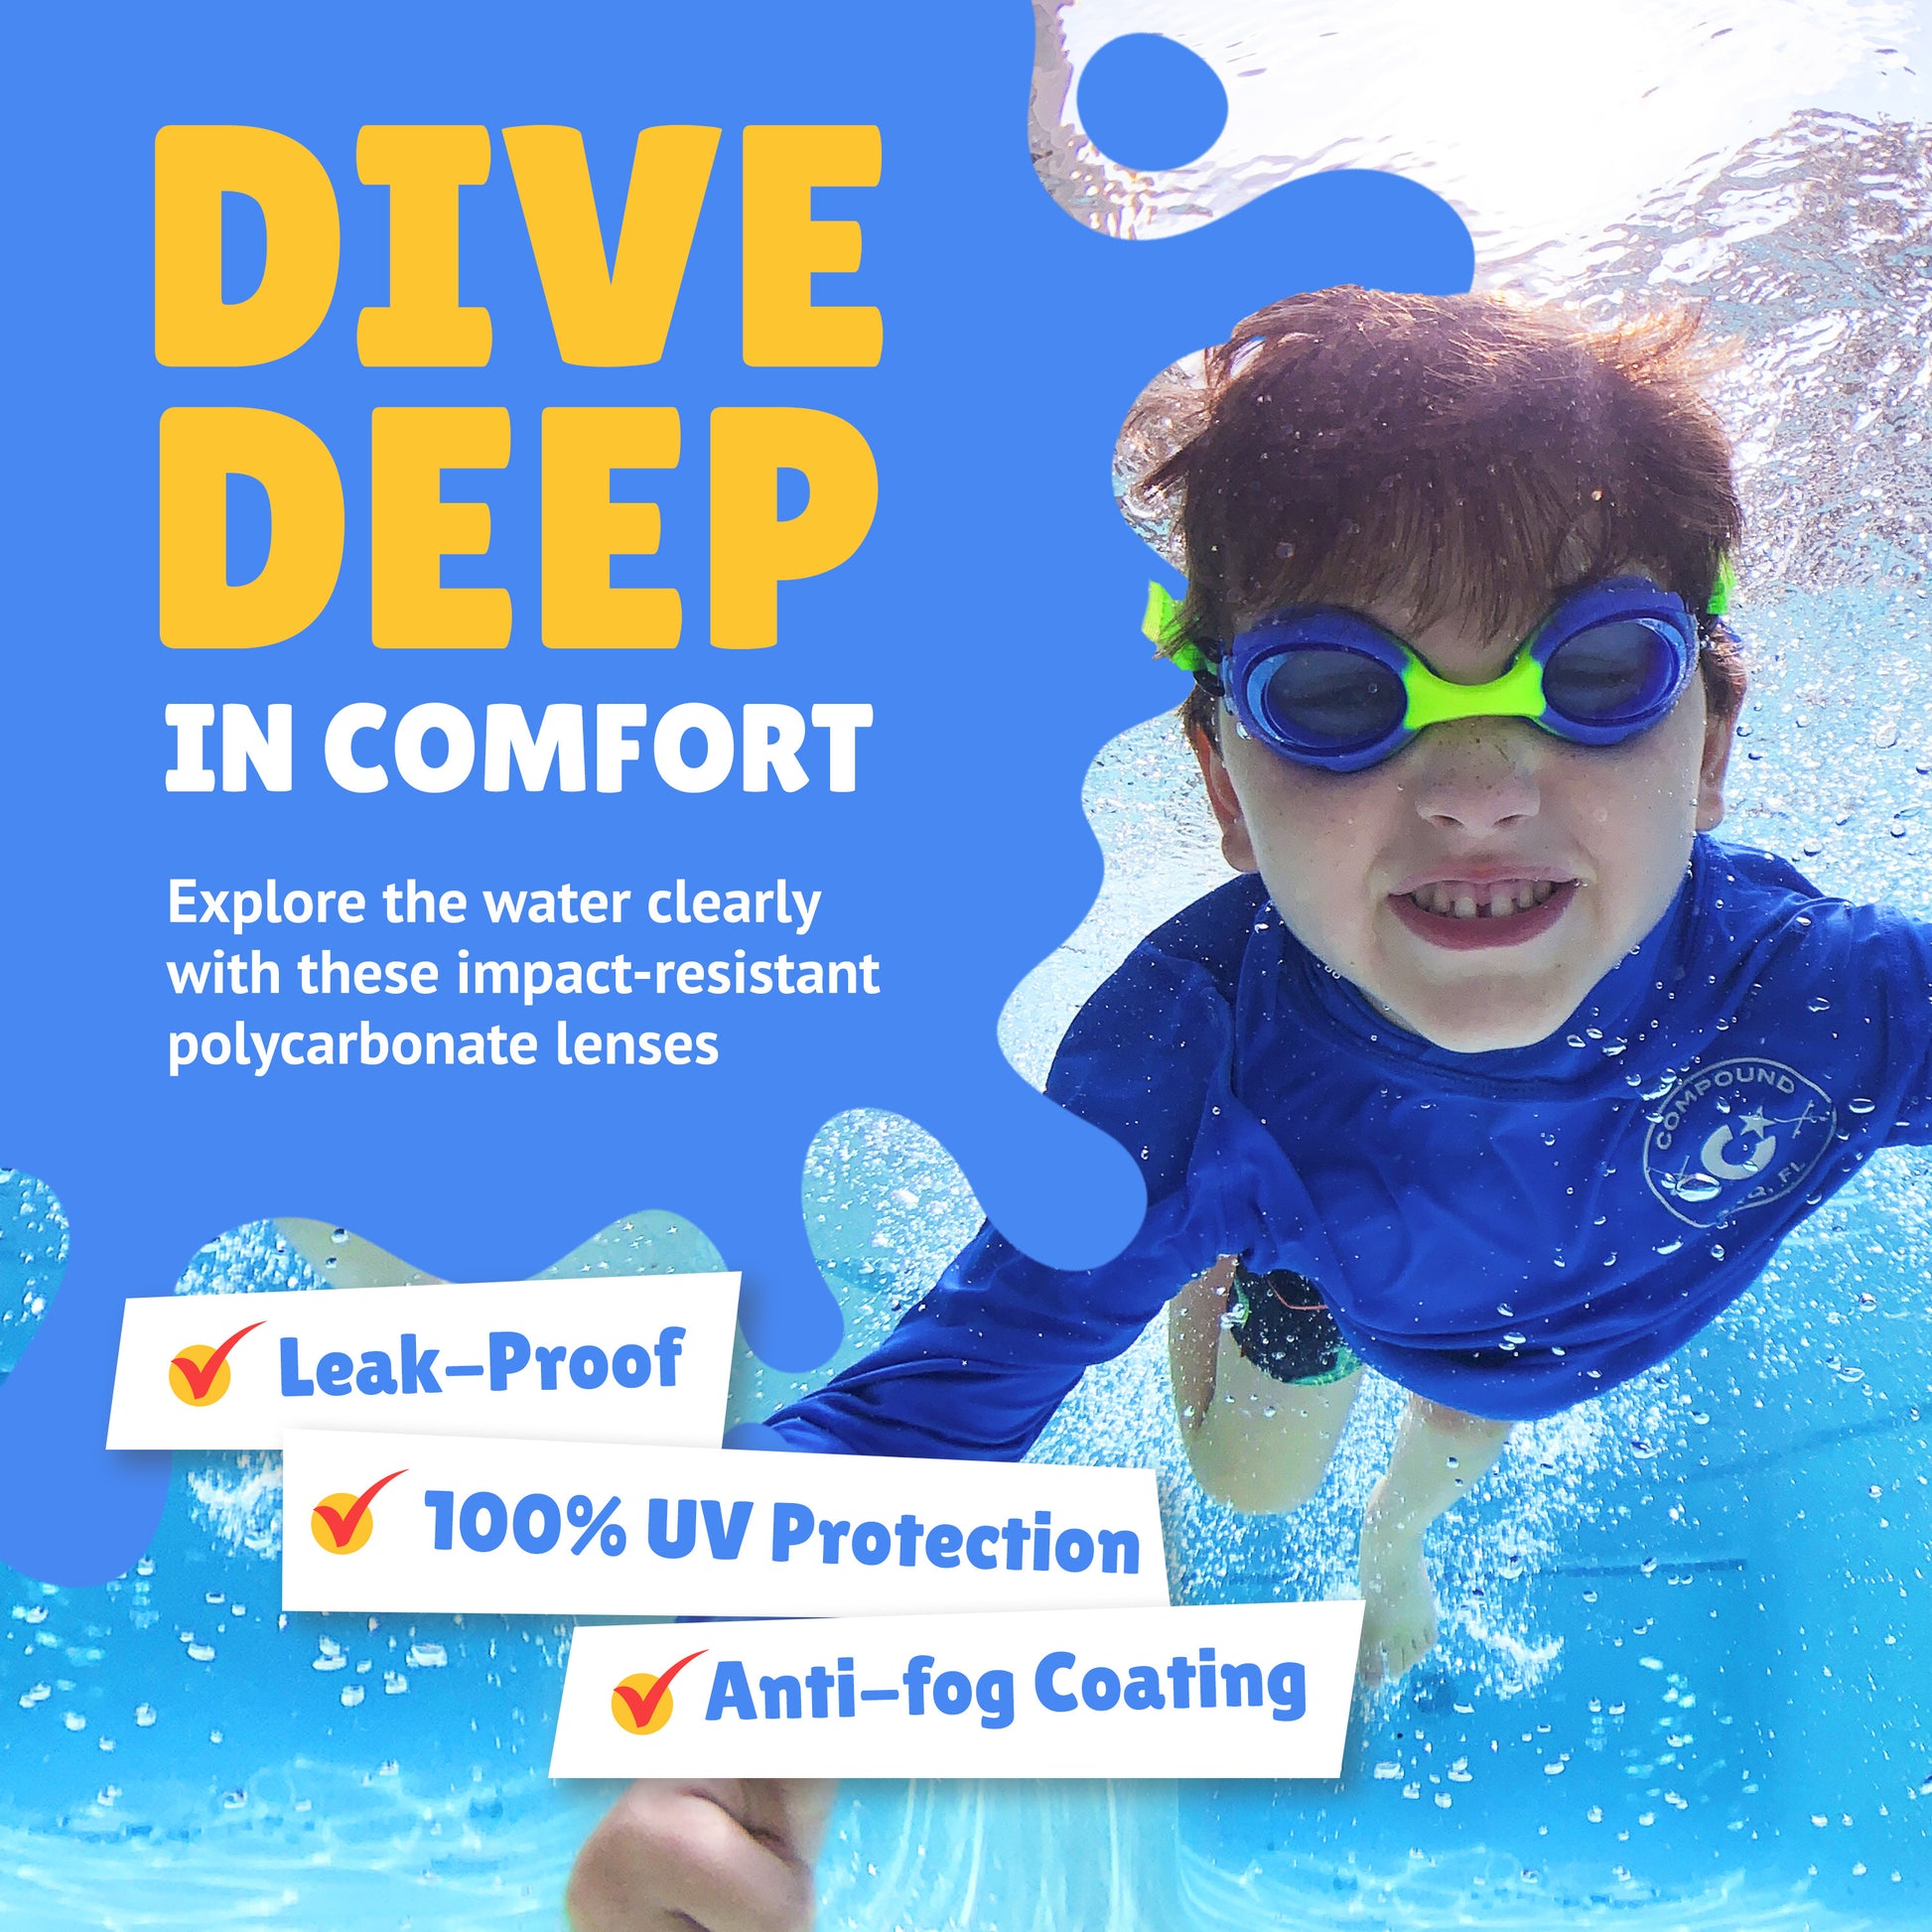 Boy smiling at camera while underwater wearing blue Frogglez Swim Goggles. Text reads: Dive Deeop in comfort. Explore the water clearly with these impact-resistant polycarbonate lenses. Leak-proof, 100% UV protection, Anti-fog coating.